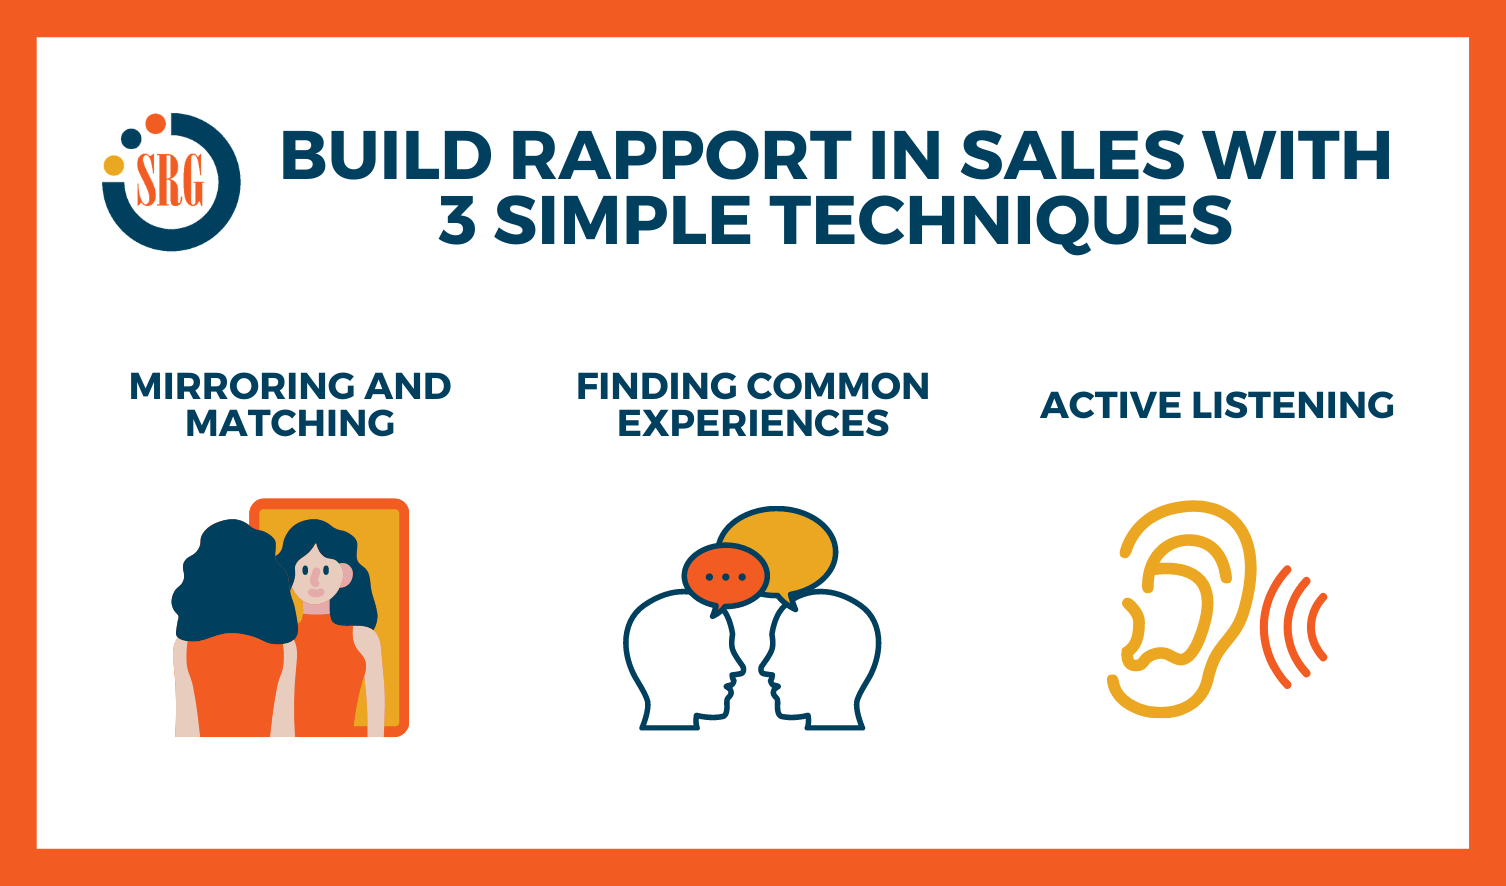 How to Build Rapport in Sales With 3 Simple Techniques